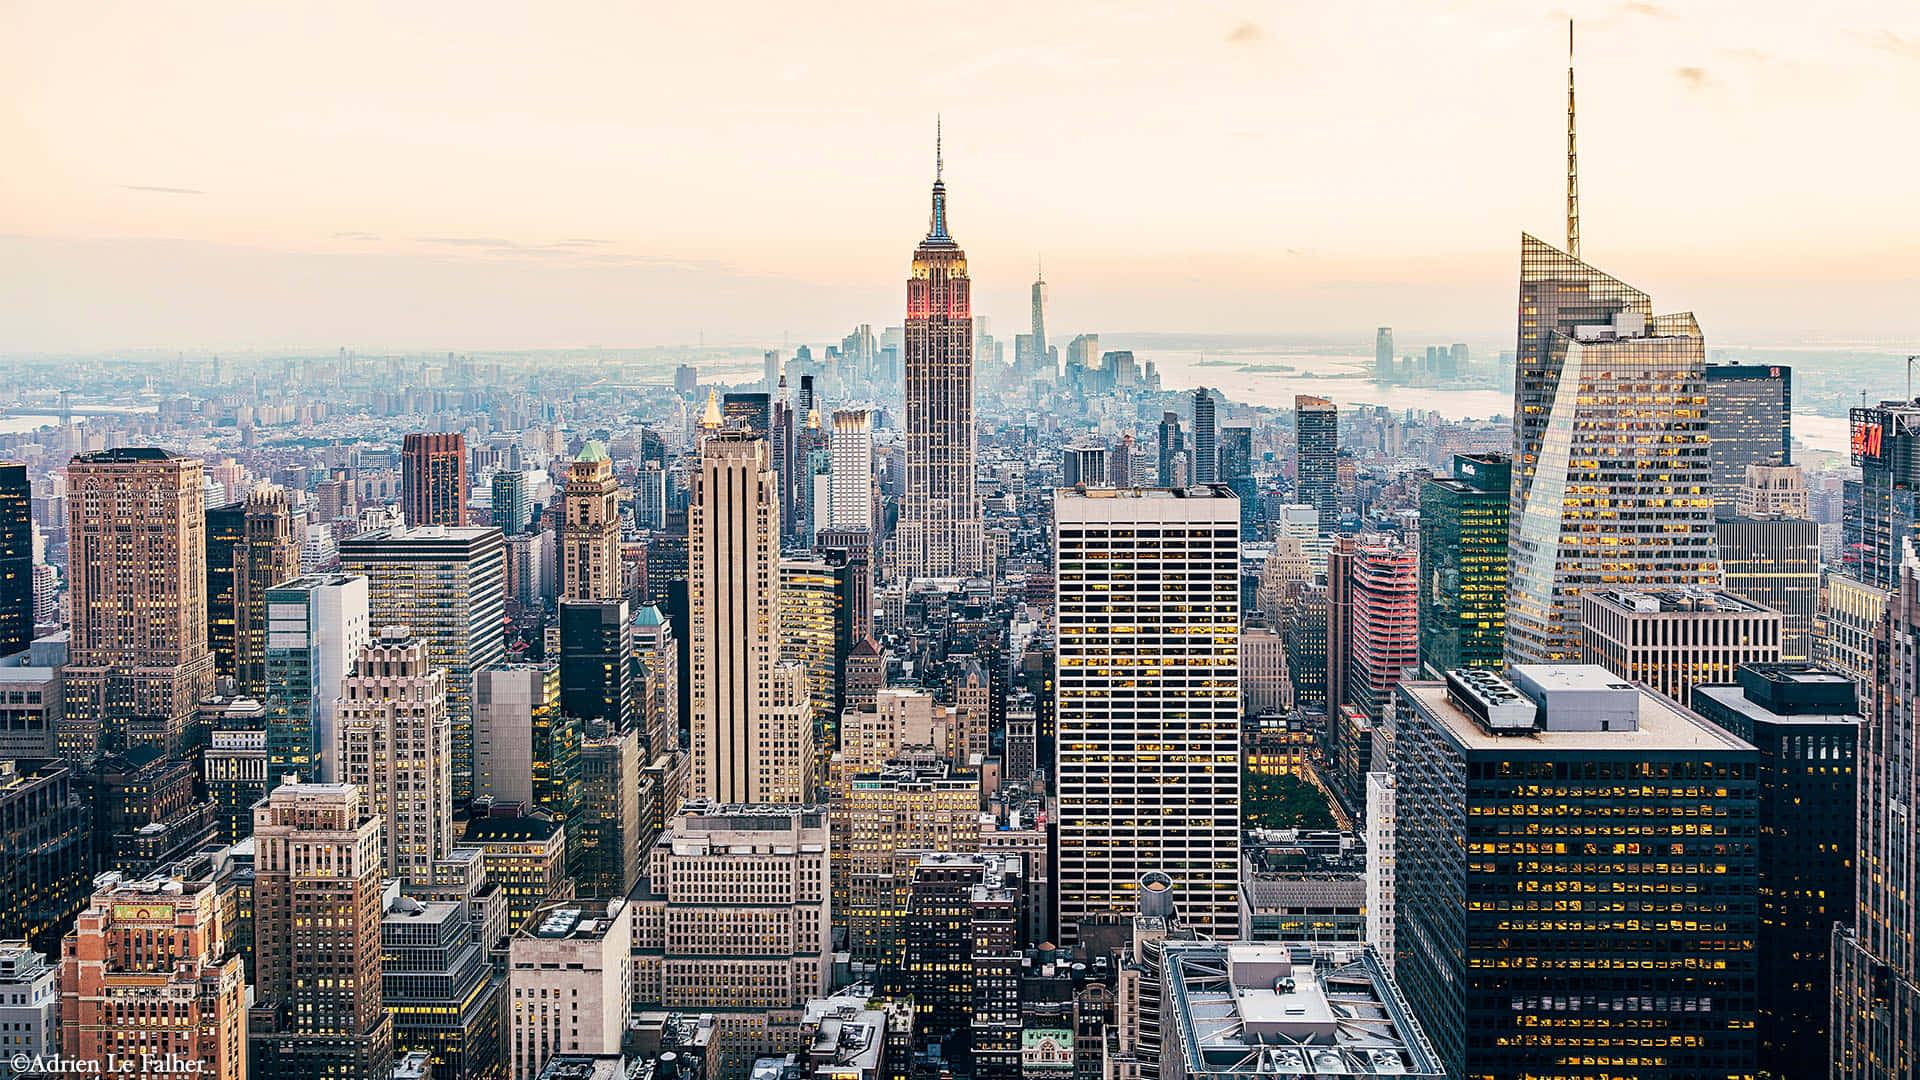 Explore the bustling city of New York